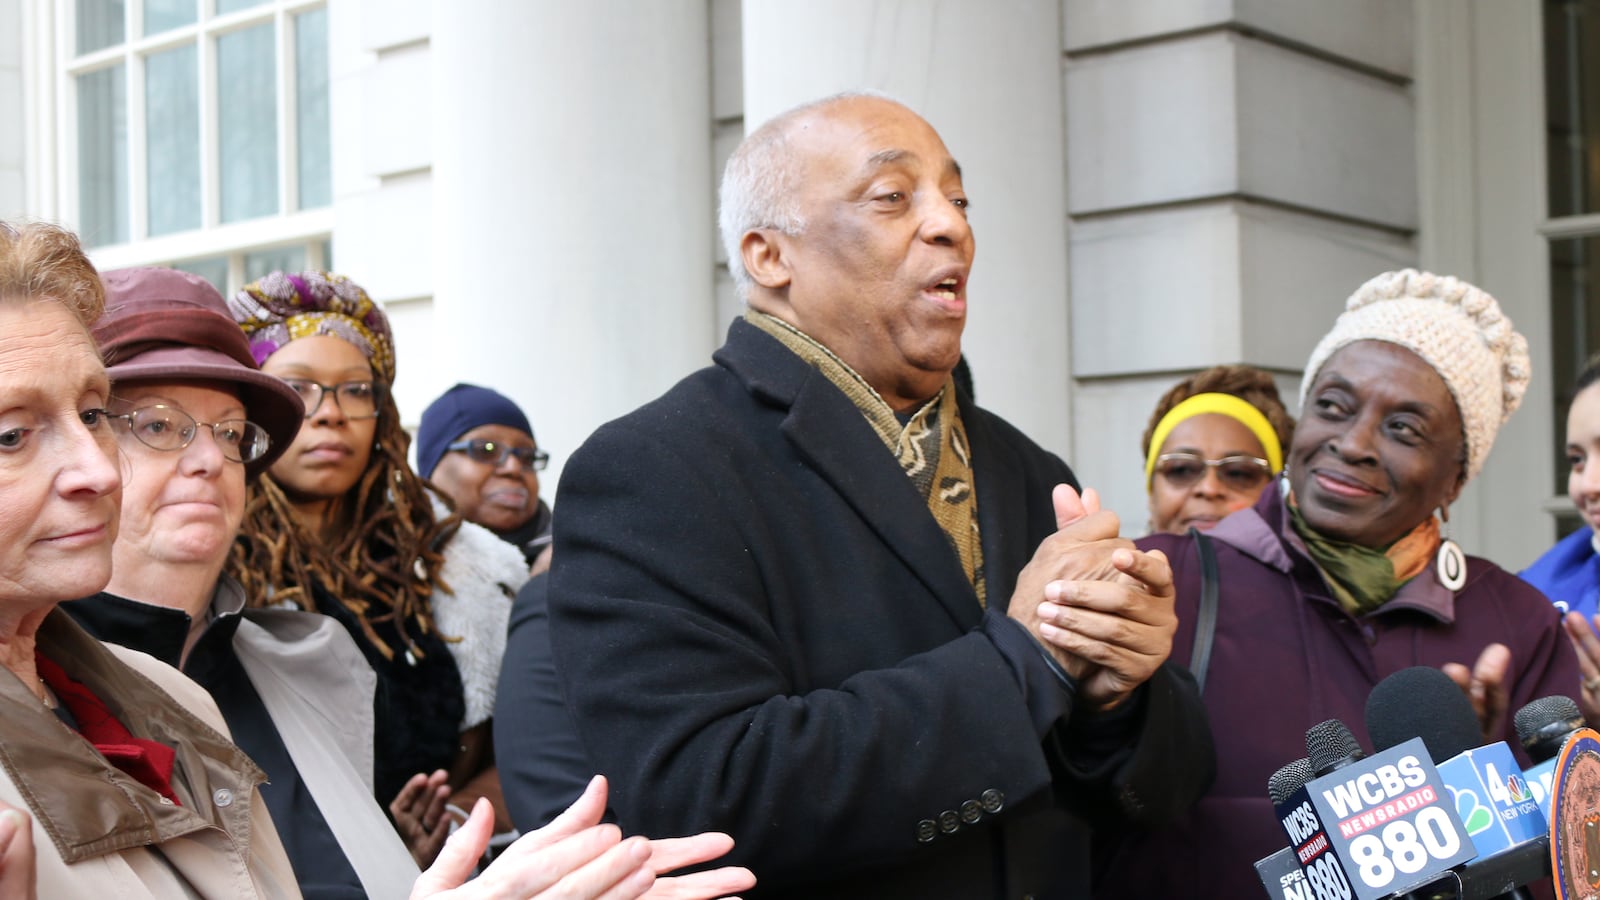 On the steps of City Hall, Assemblyman Charles Barron rallied for support to scrap the Specialized High School Admissions Test earlier this year.